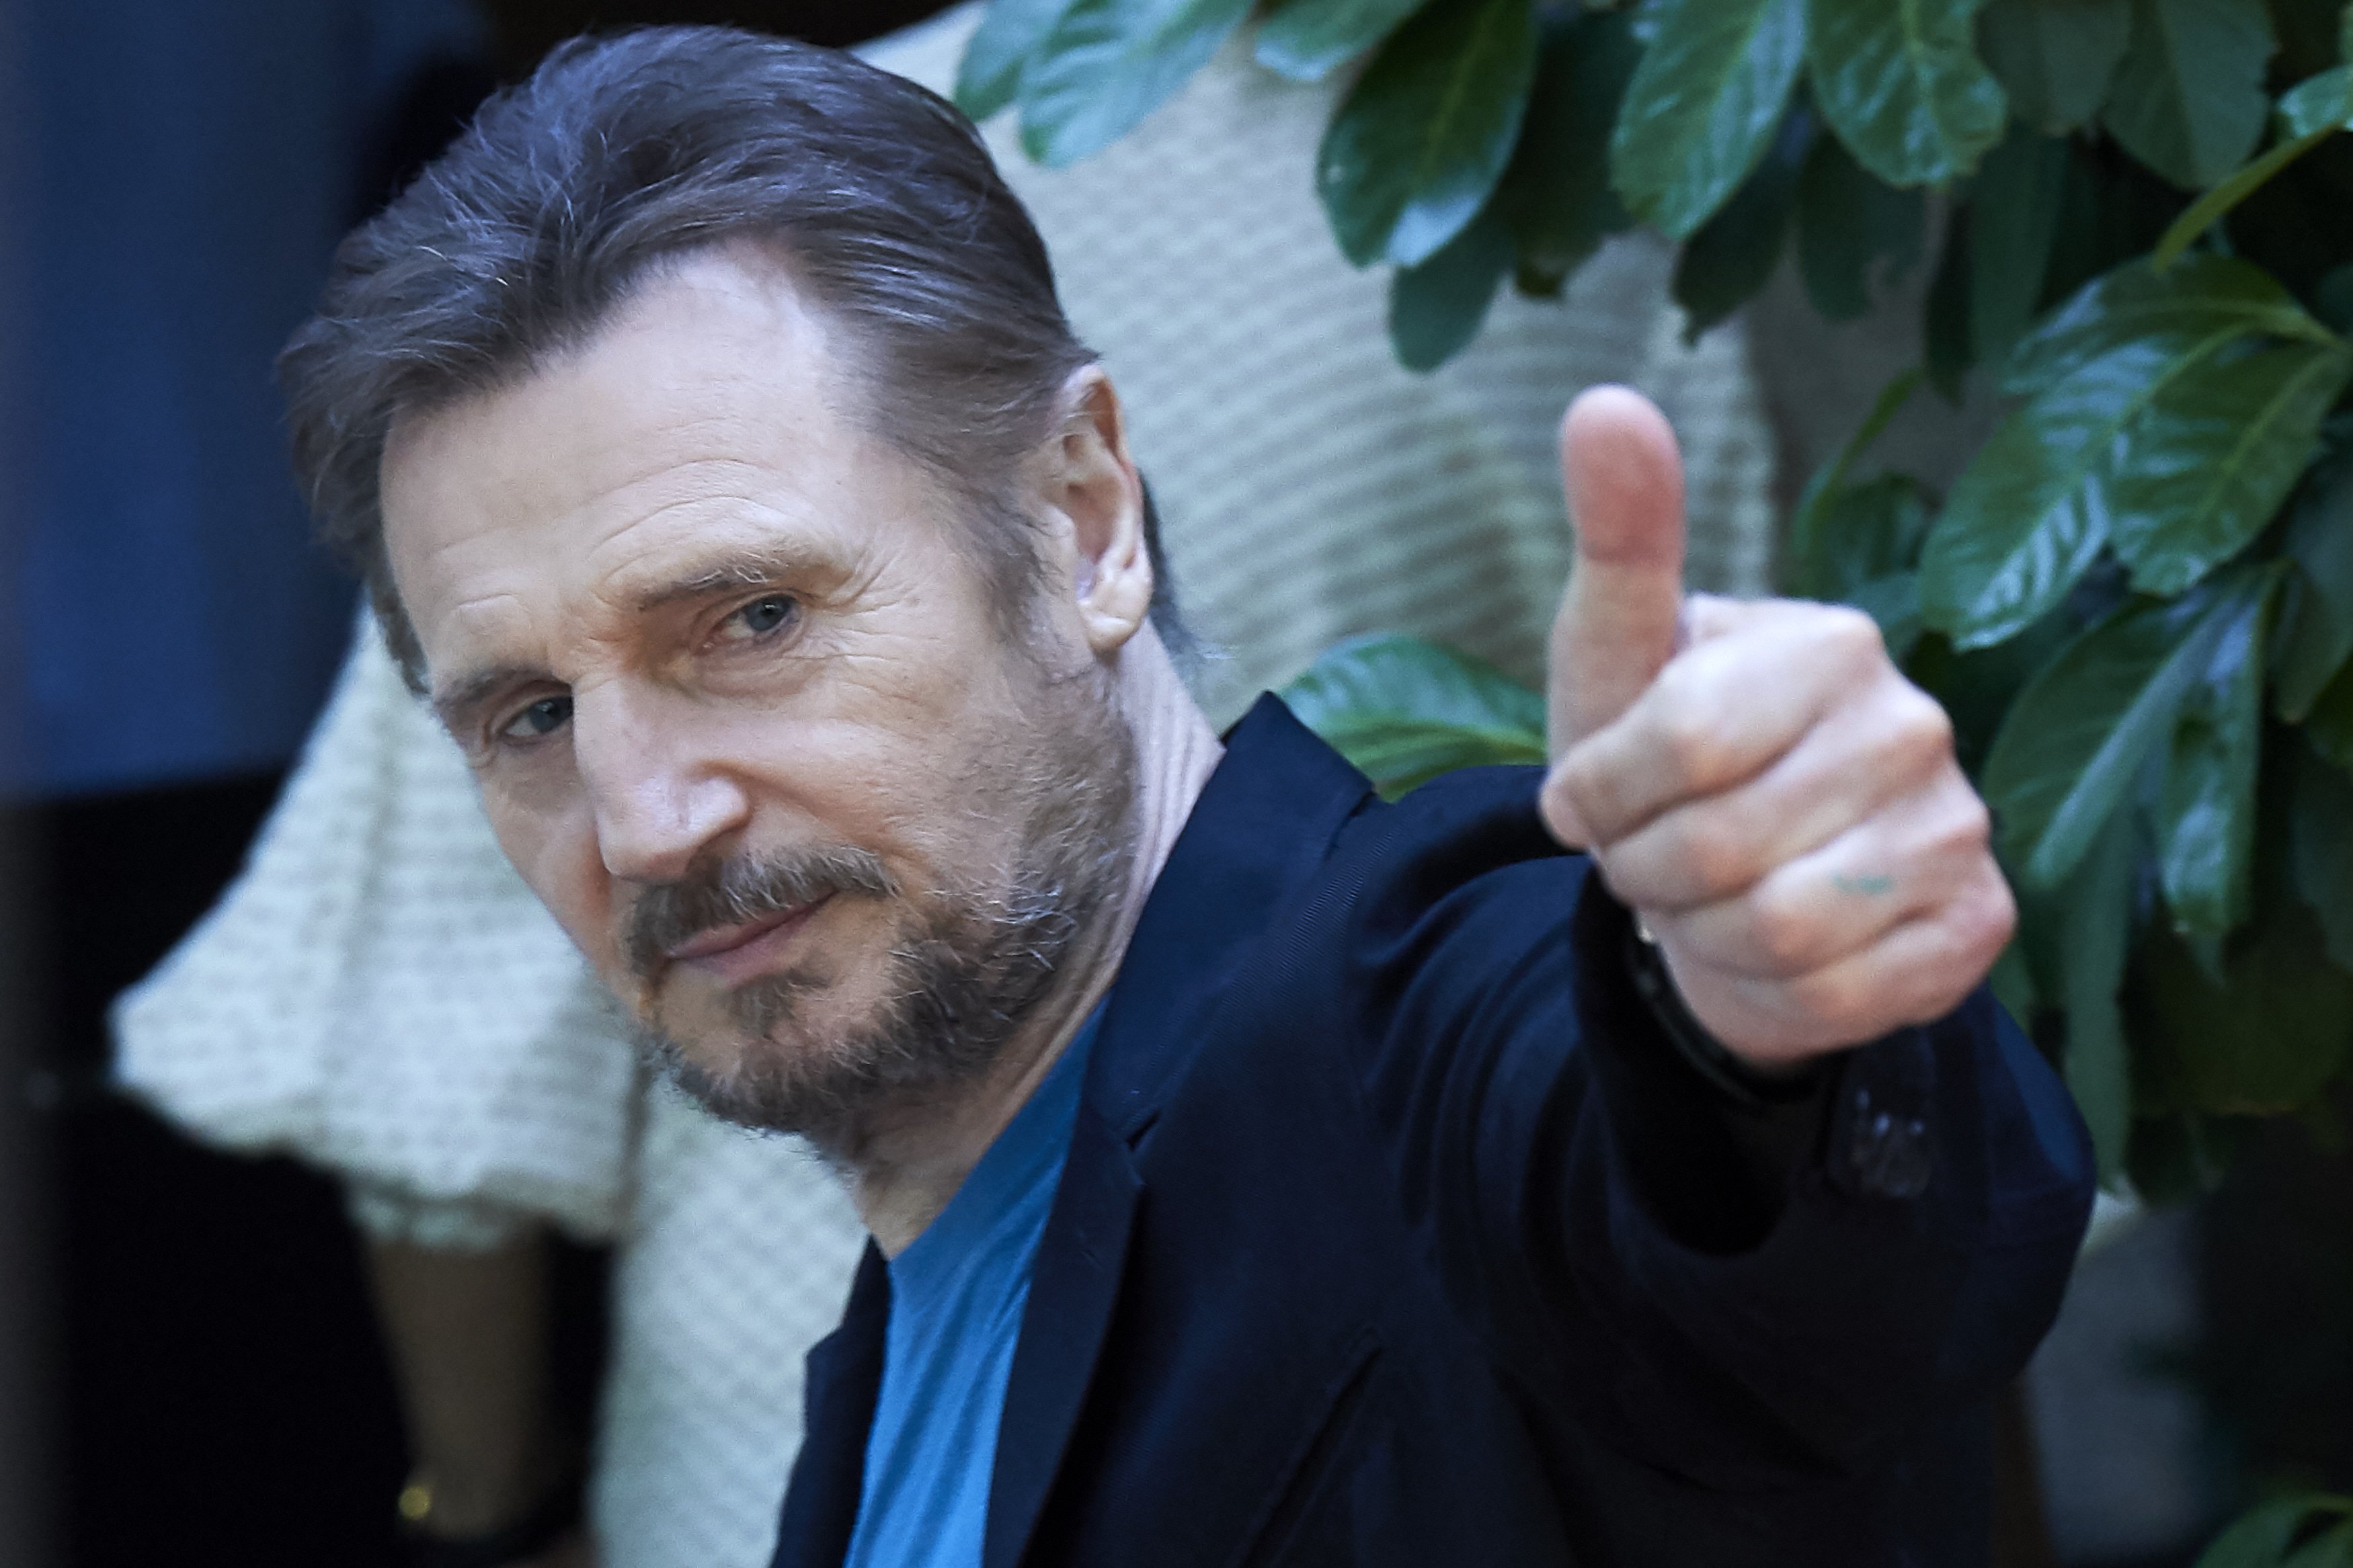 Liam Neeson attending "Venganza Bajo Cero" photocall at the Villamagna Hotel on July 16, 2019 in Madrid, Spain. / Source: Getty Images